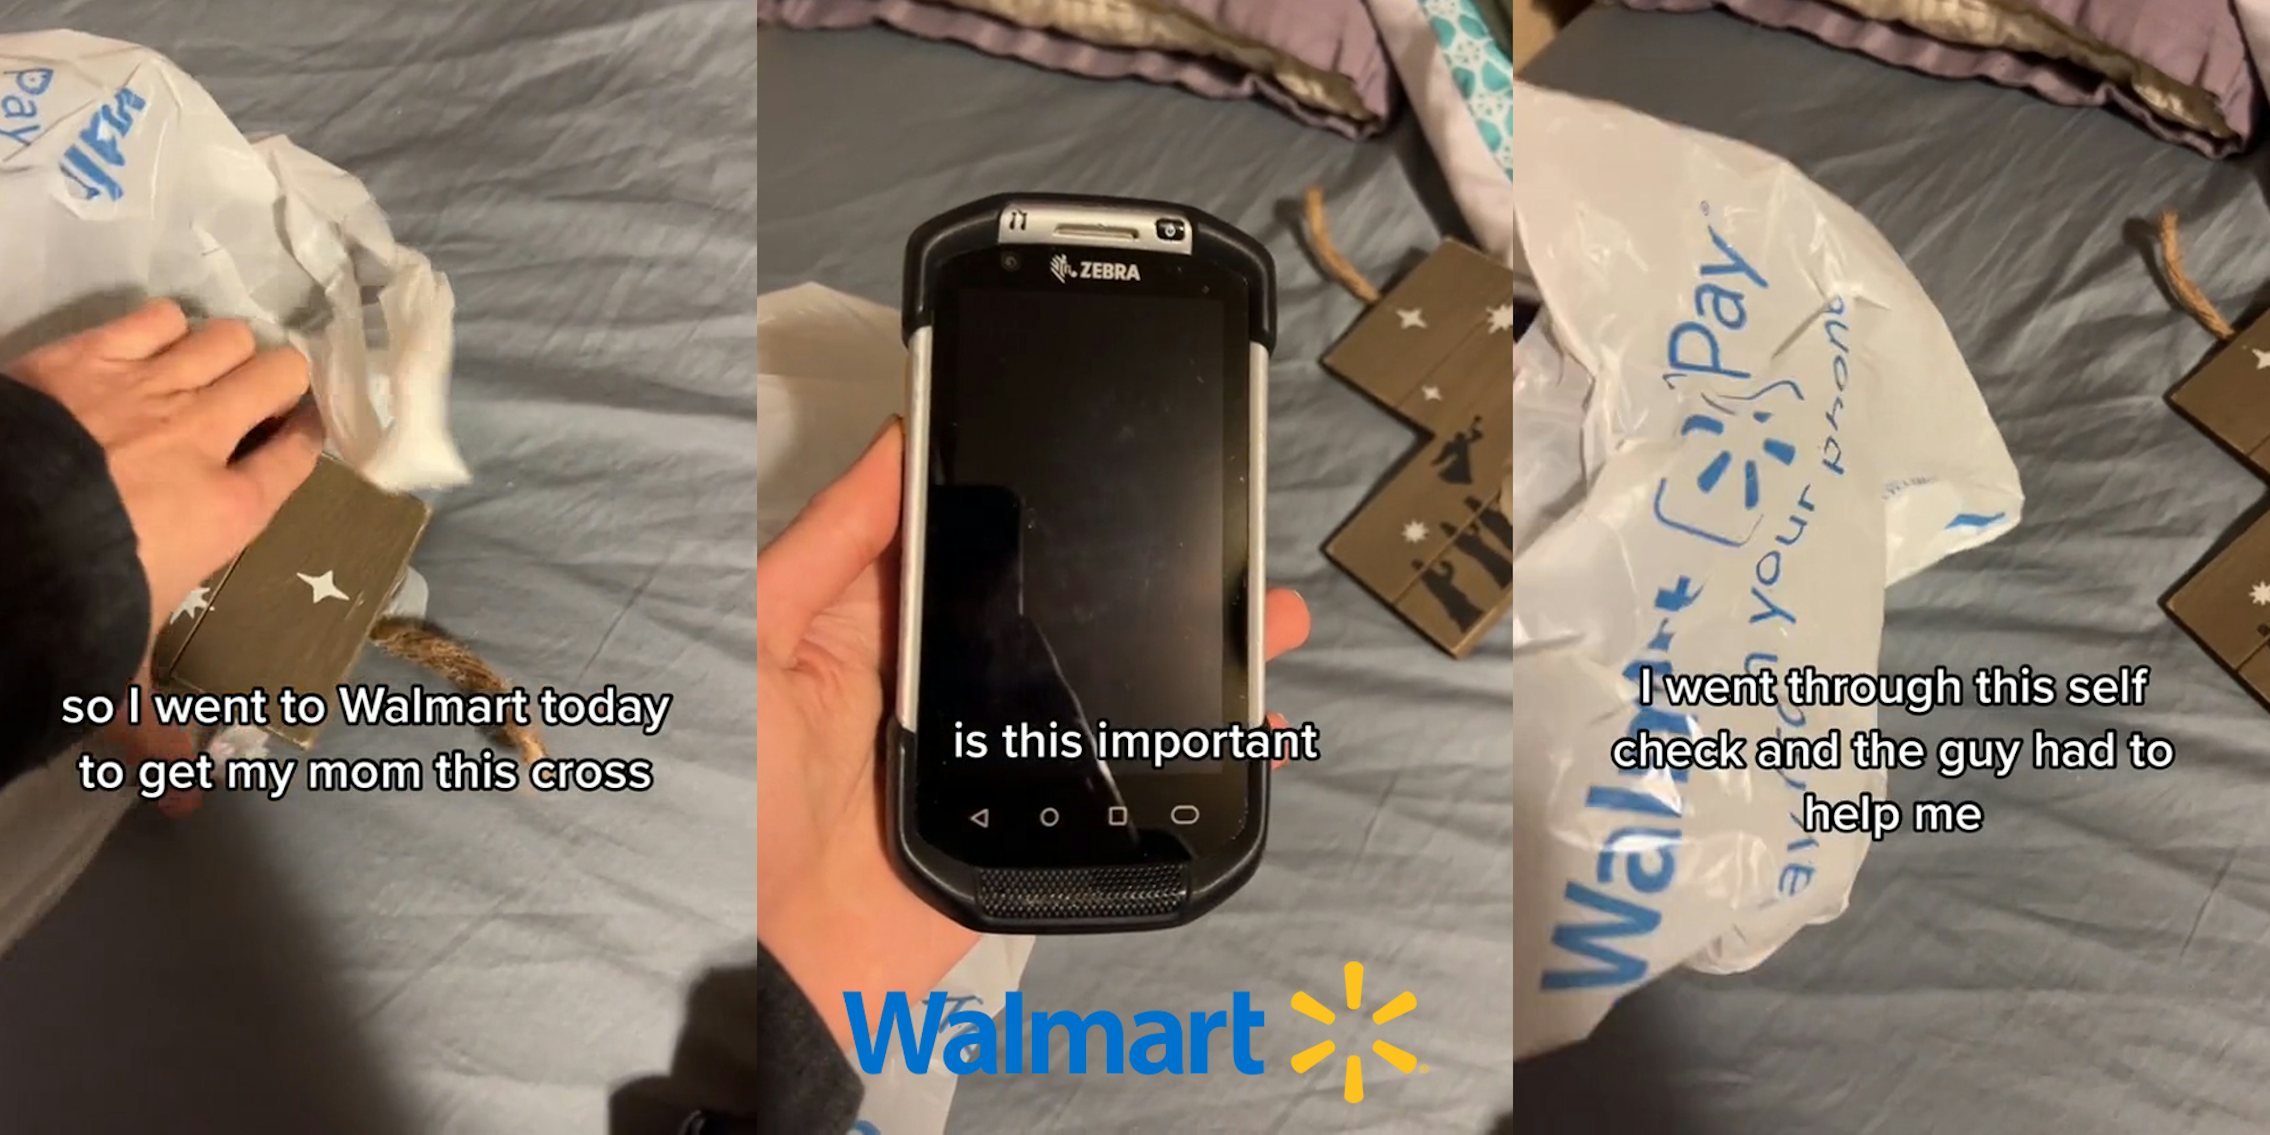 person grabbing cross out of Walmart bag caption 'so I went to Walmart today to get my mom this cross' (l) person holding Walmart zebra scanner with Walmart logo at bottom caption 'is this important' (c) person hand in Walmart bag caption 'I went through this self check and the guy had to help me' (r)